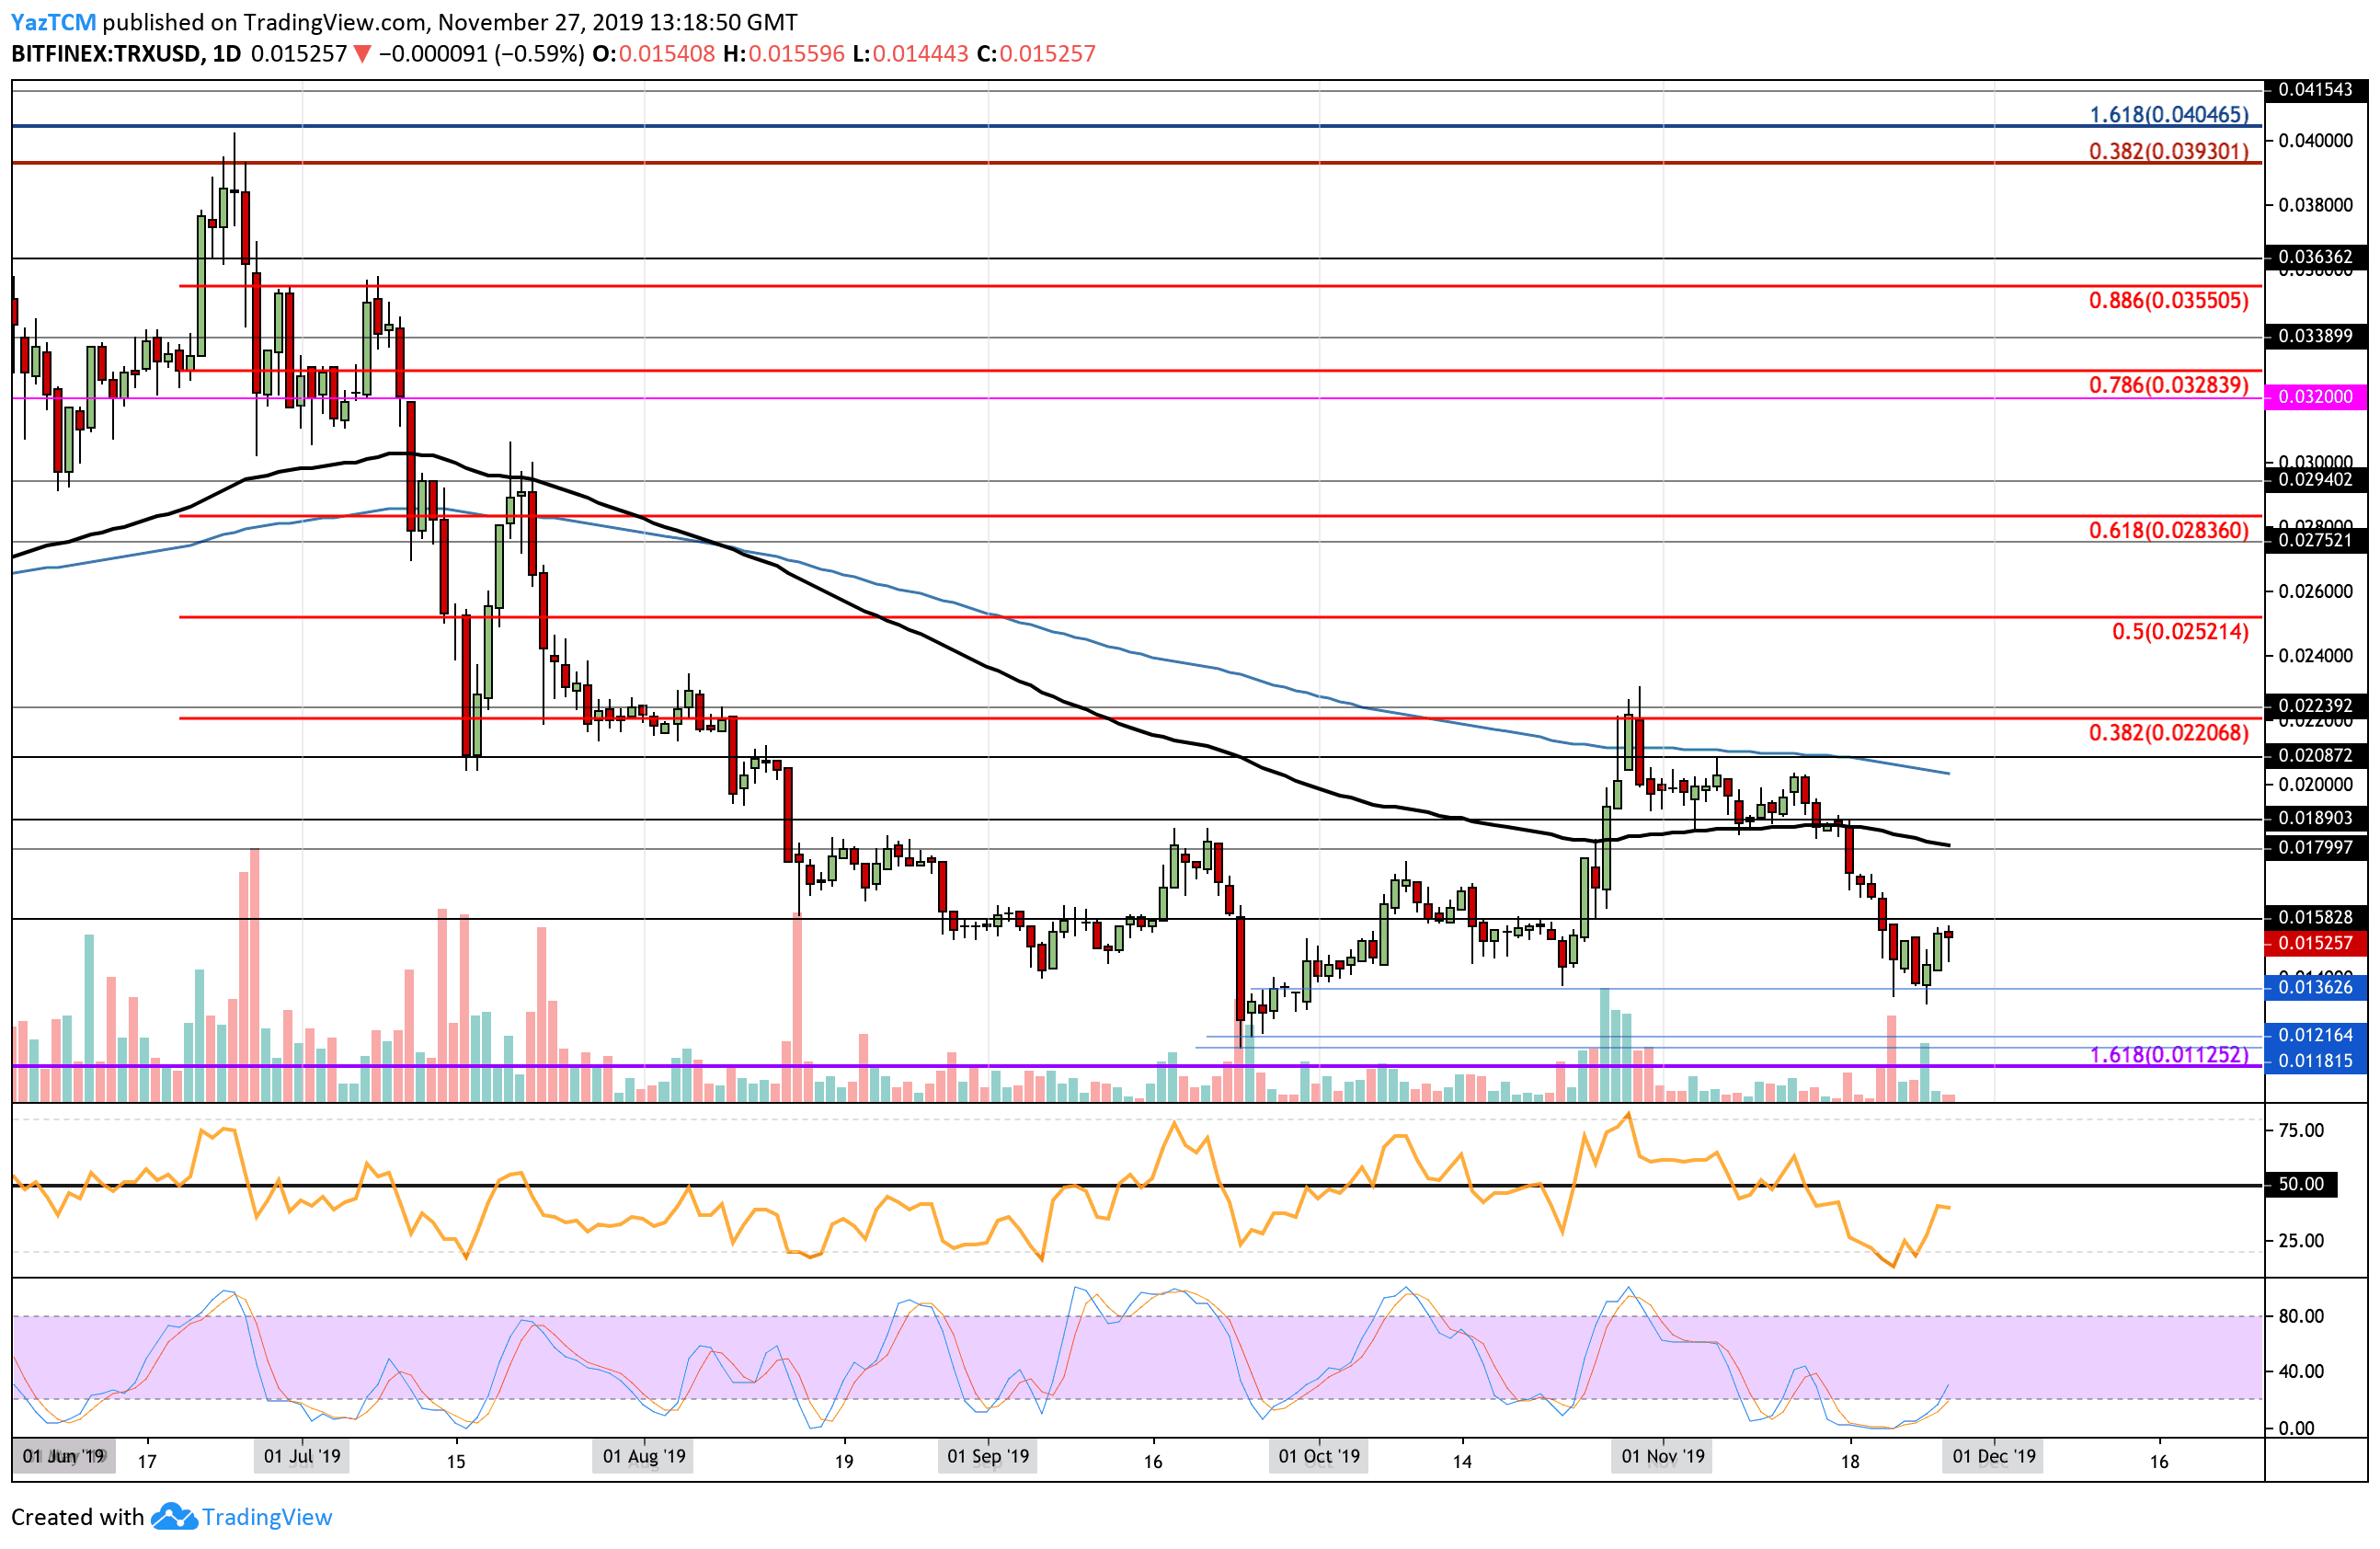 Tron Price Analysis: Following 6% Gains, TRX Is Close To Enter The Top 10 Cryptocurrencies